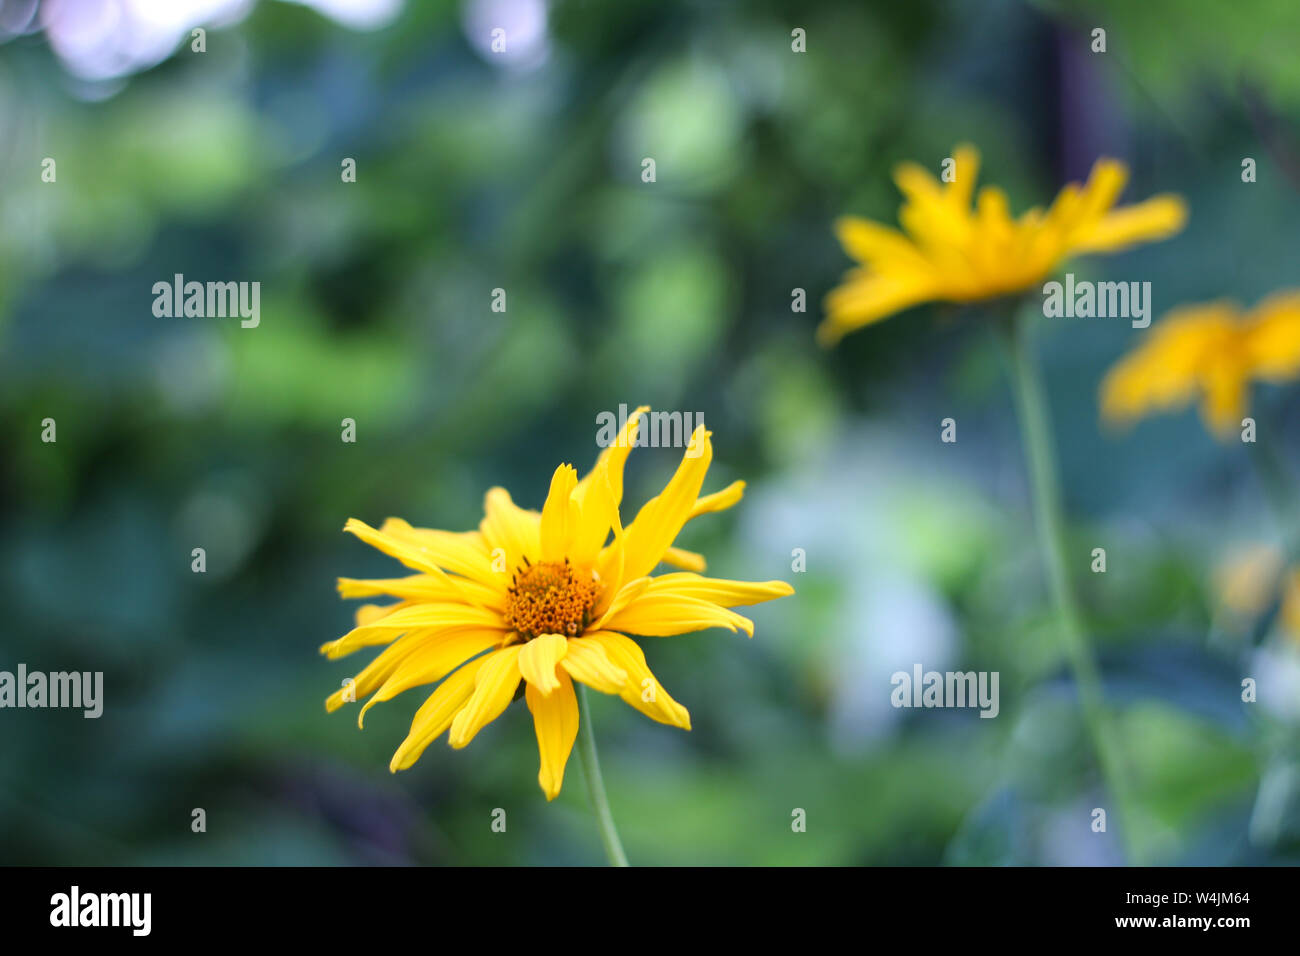 yellow flowers like daisies on a green blurred background. Close up Doronicum flowering plants Stock Photo